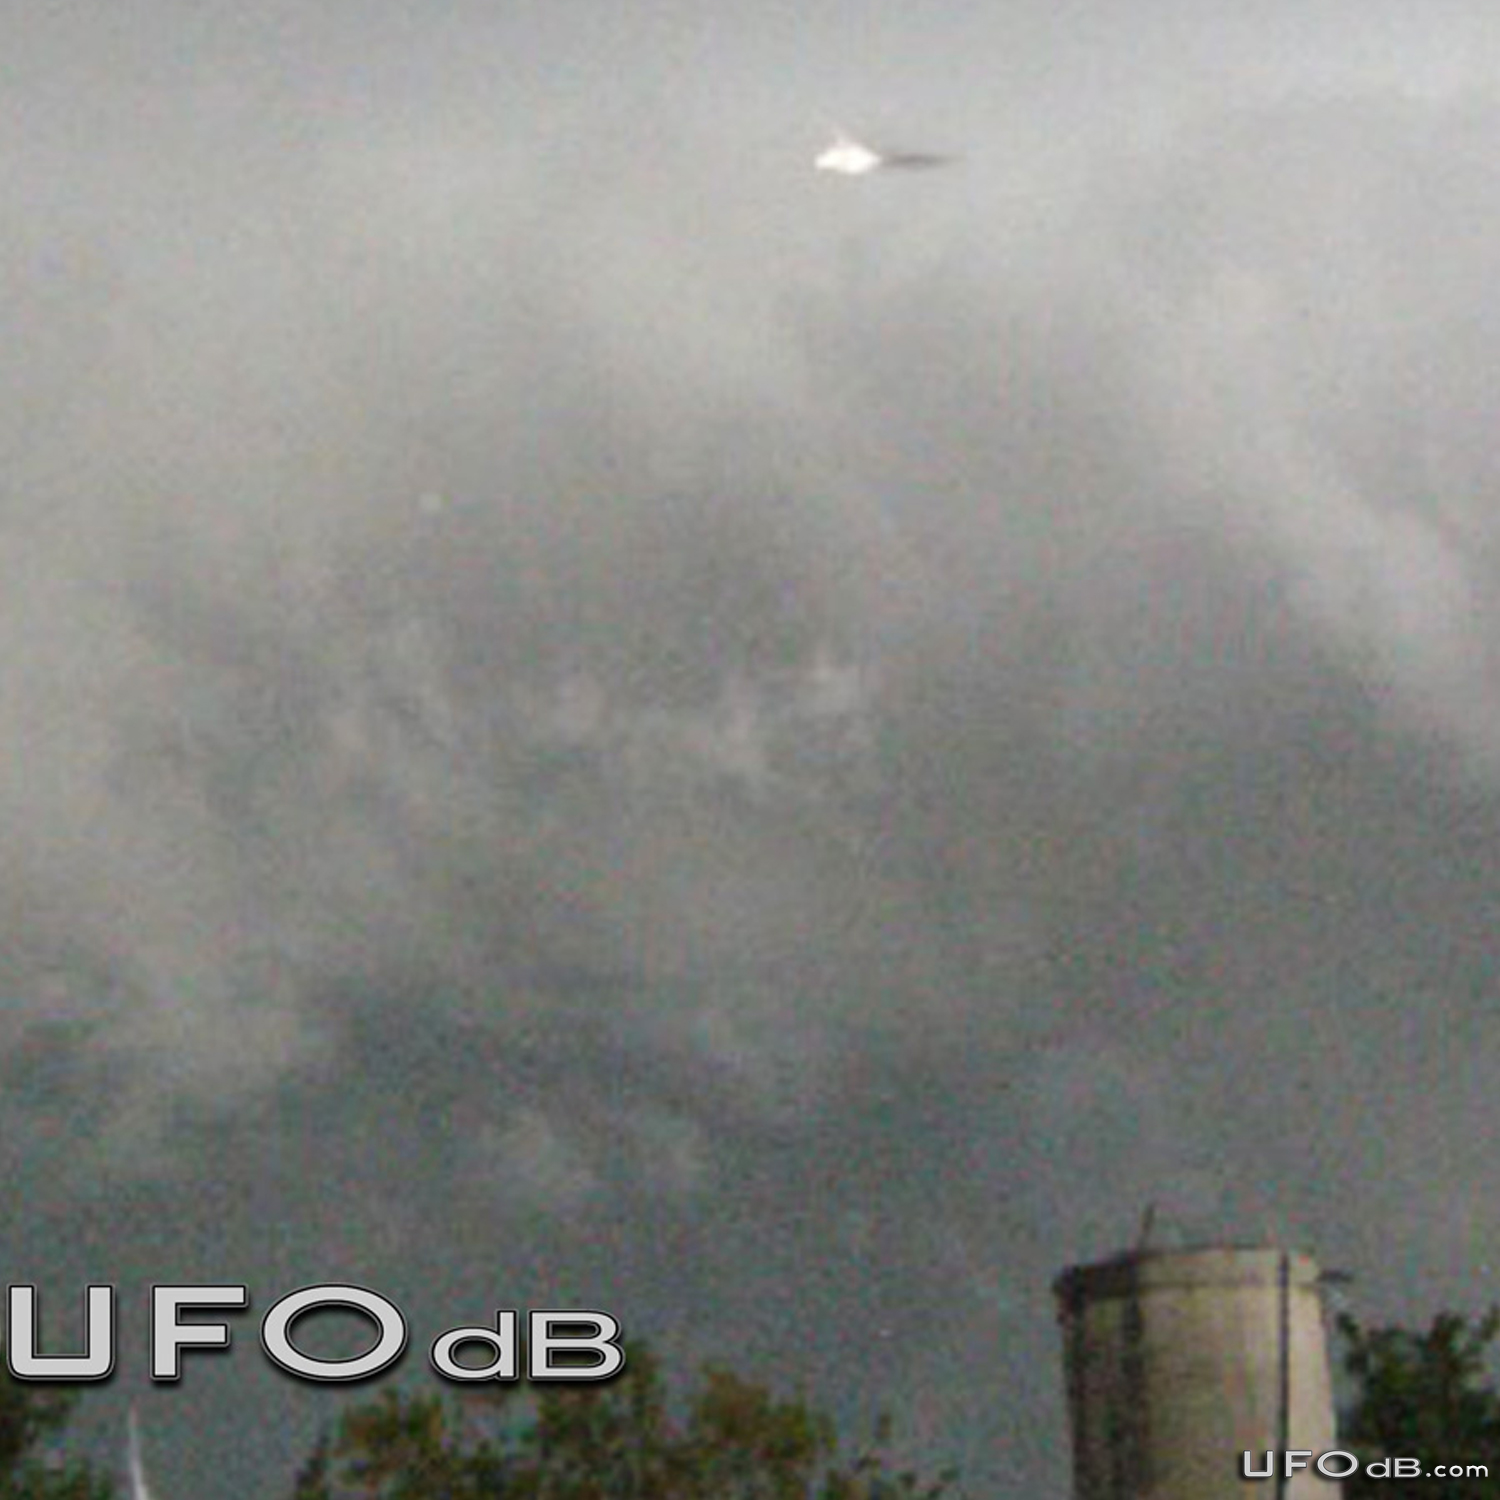 Rosario City Web Site display a UFO in stormy clouds | Argentina 2011 UFO Picture #259-2